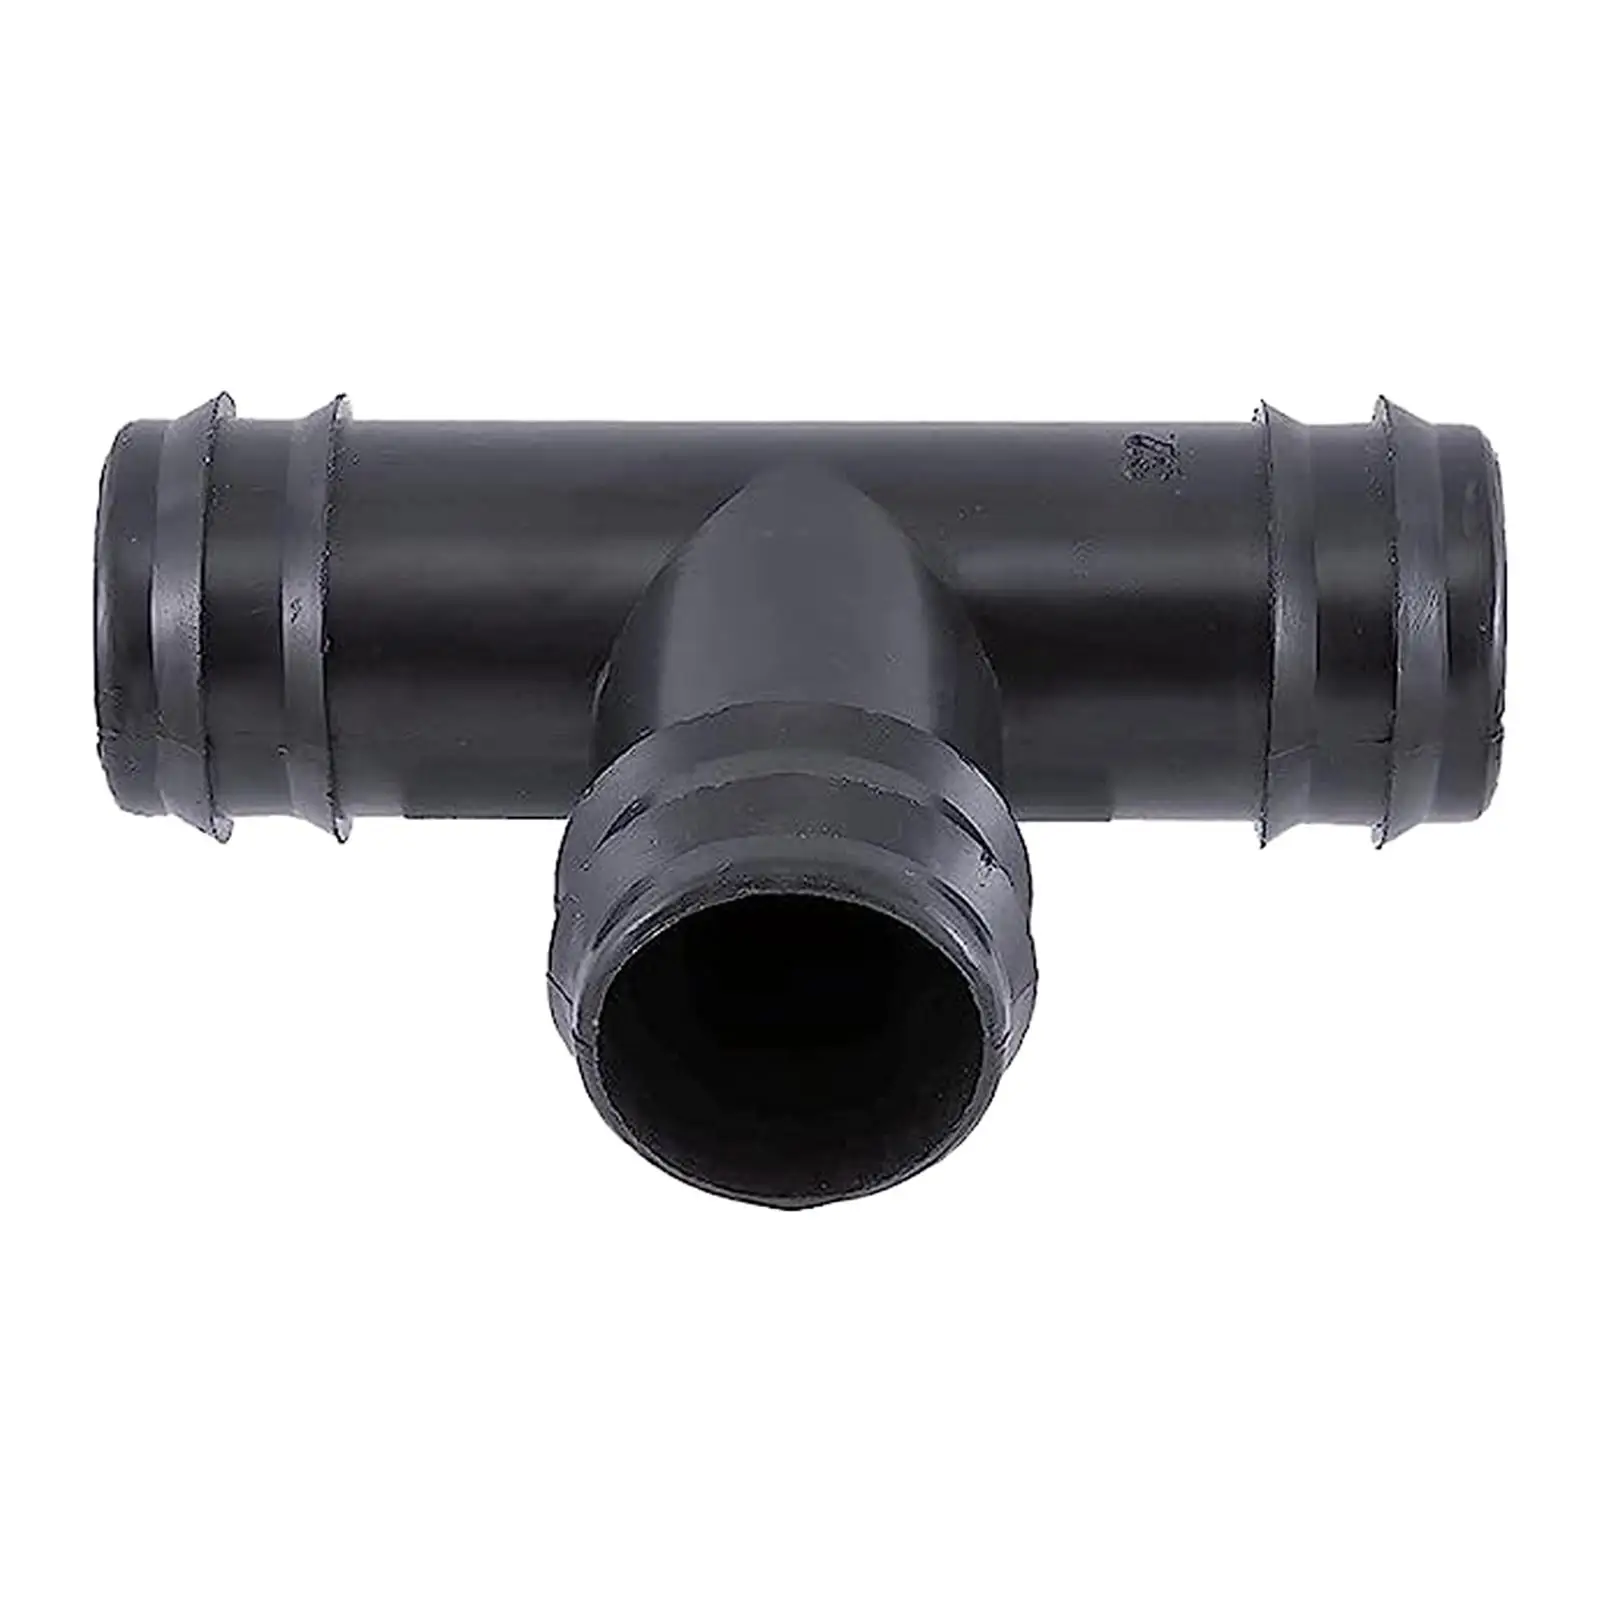 T Joint Hose Connector Pool Hose Connector for 1.25`` 1.5`` Diameter Skimmer